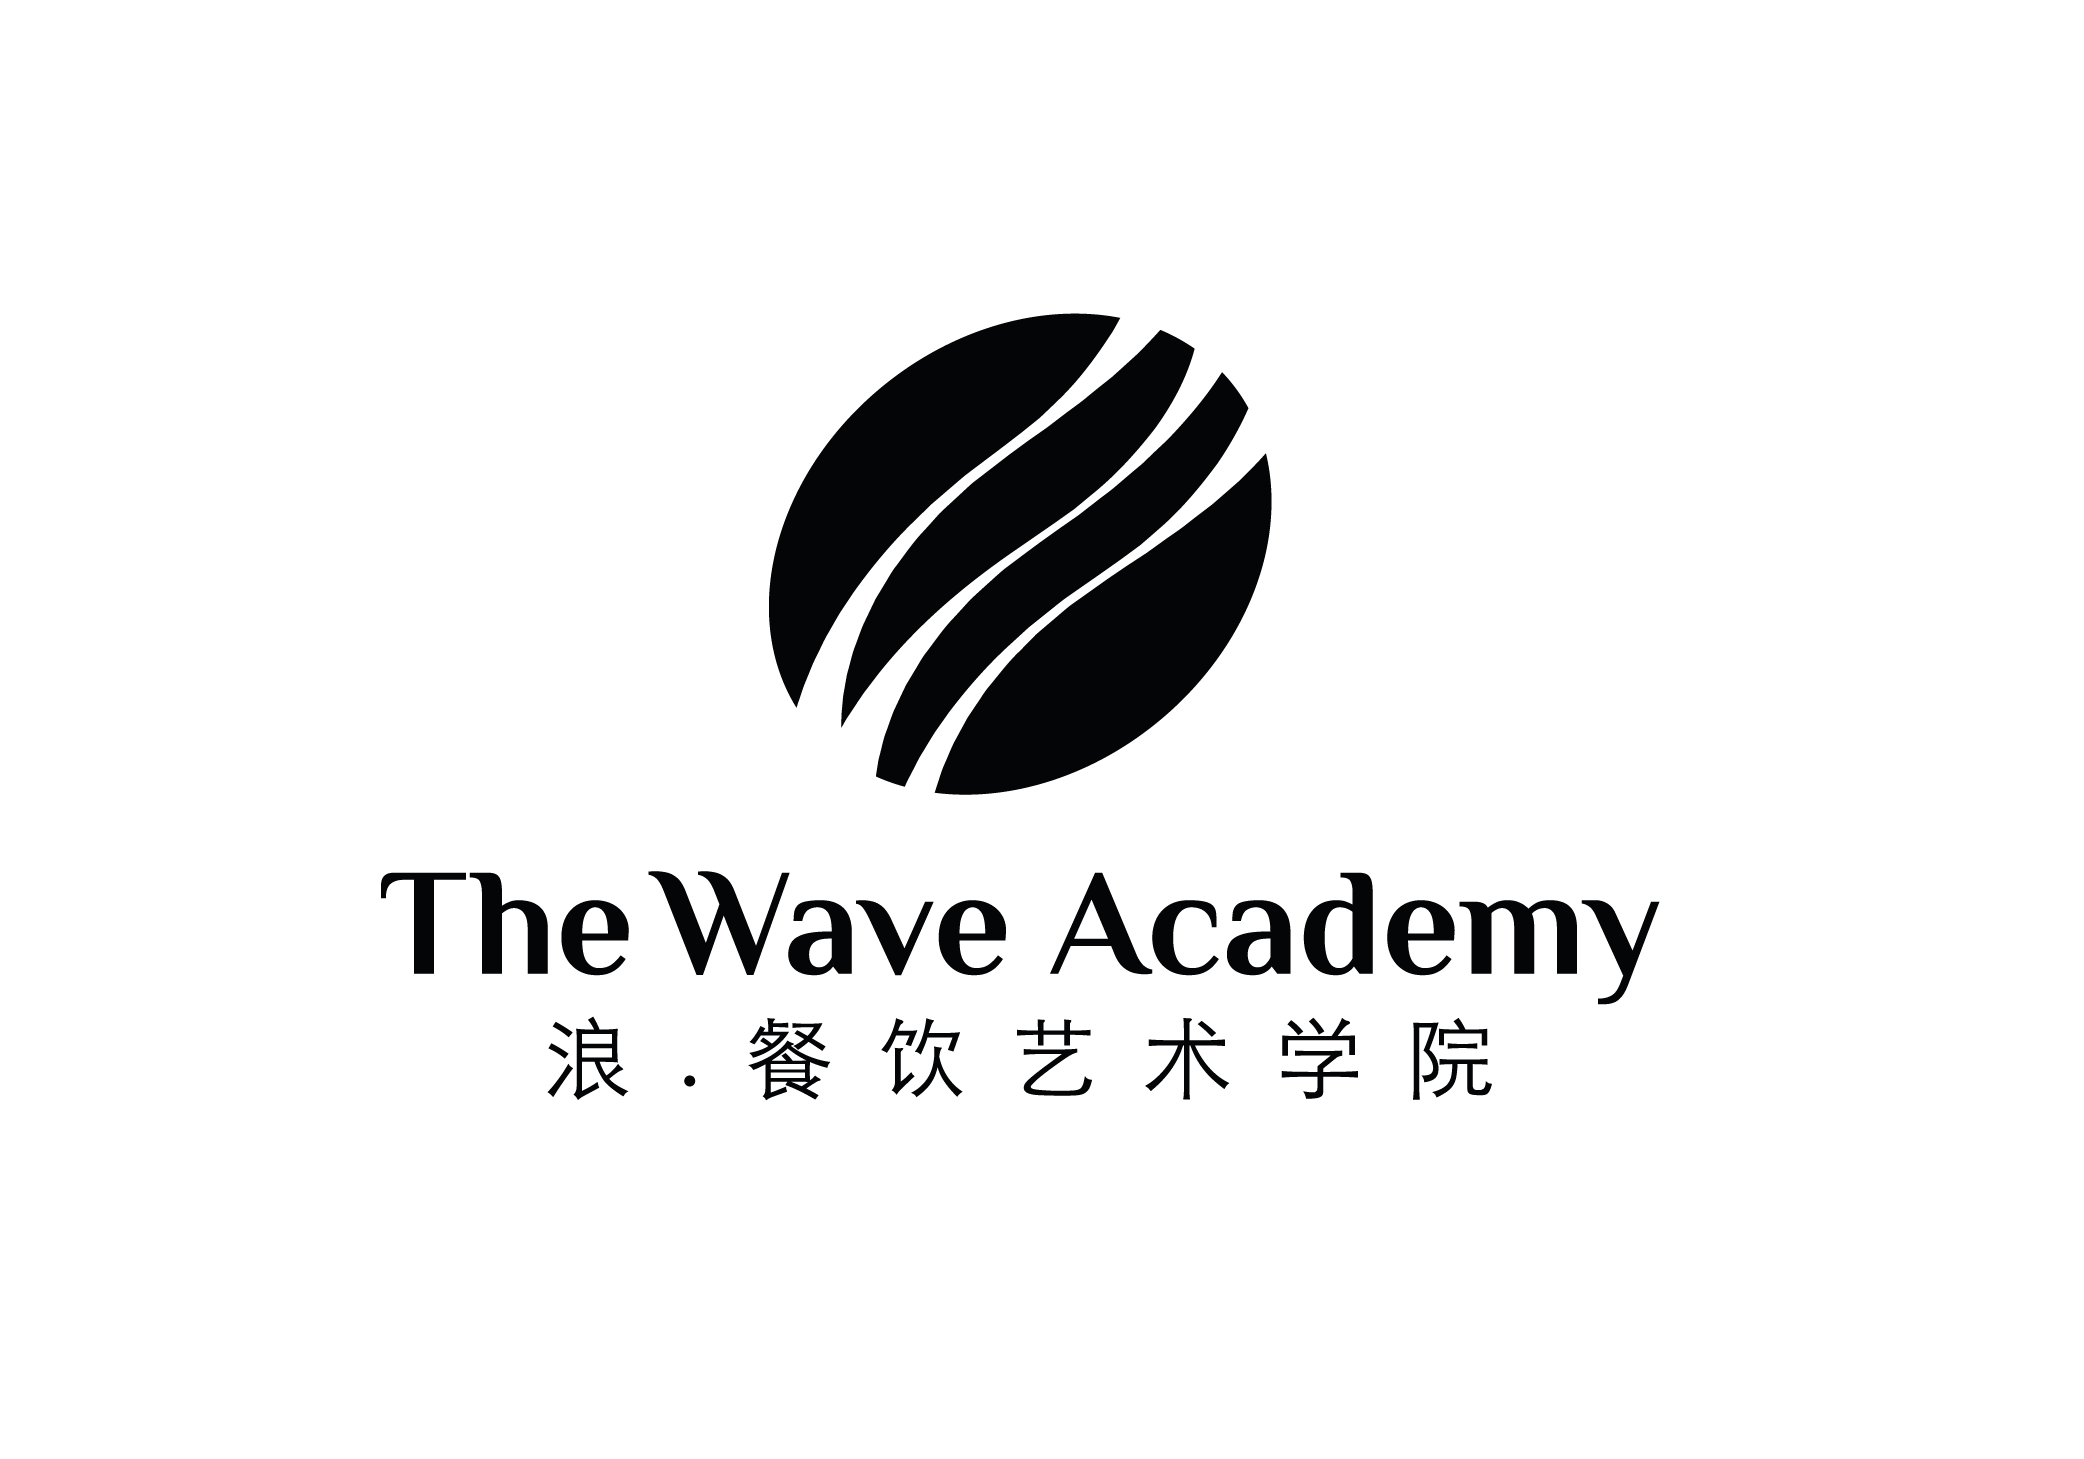 Coffee Academy for Perfect Barista Courses in Malaysia – The Wave Academy